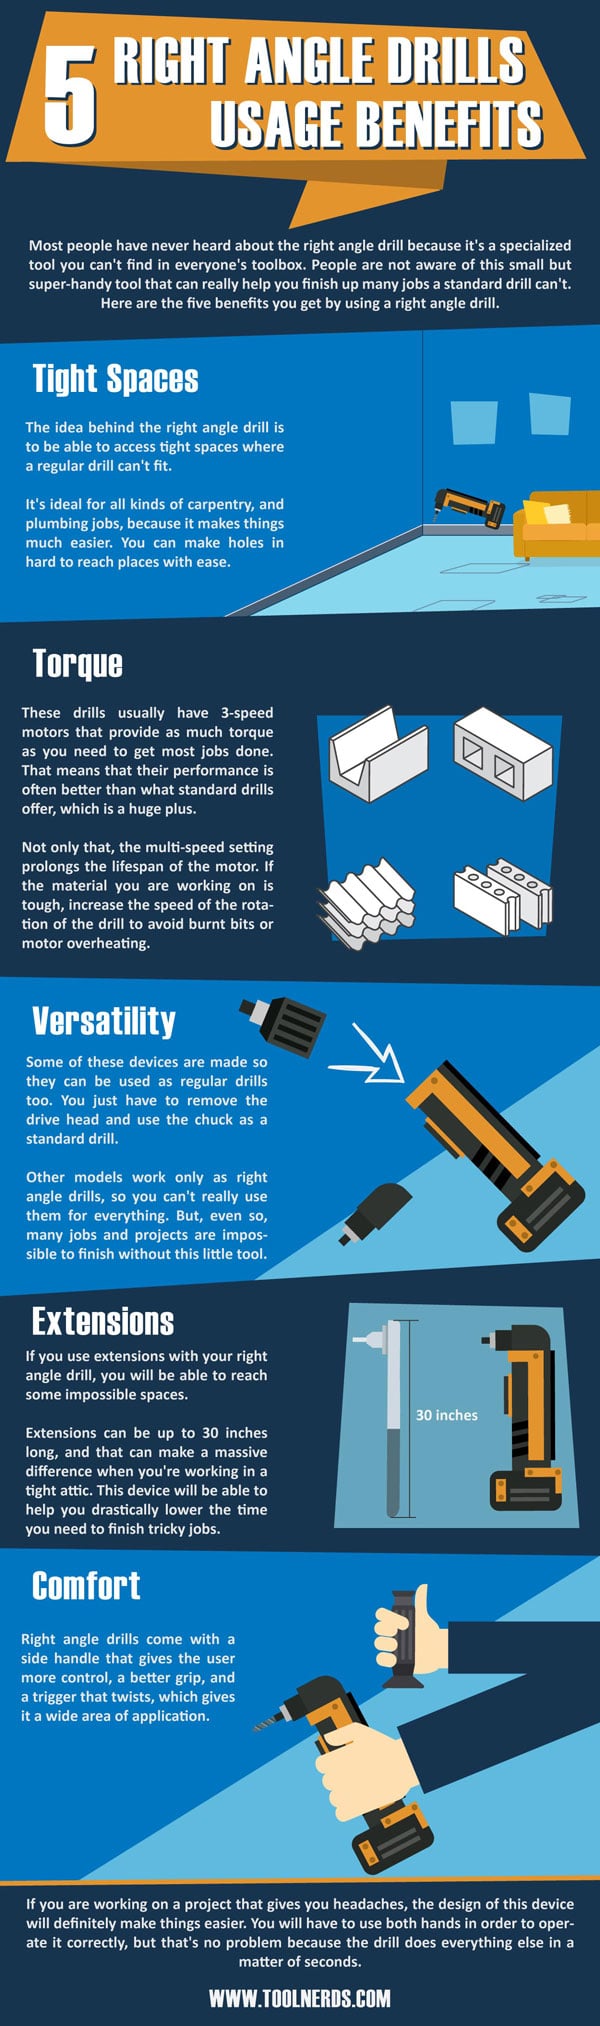 5 Right Angle Drills Usage Benefits Infographic